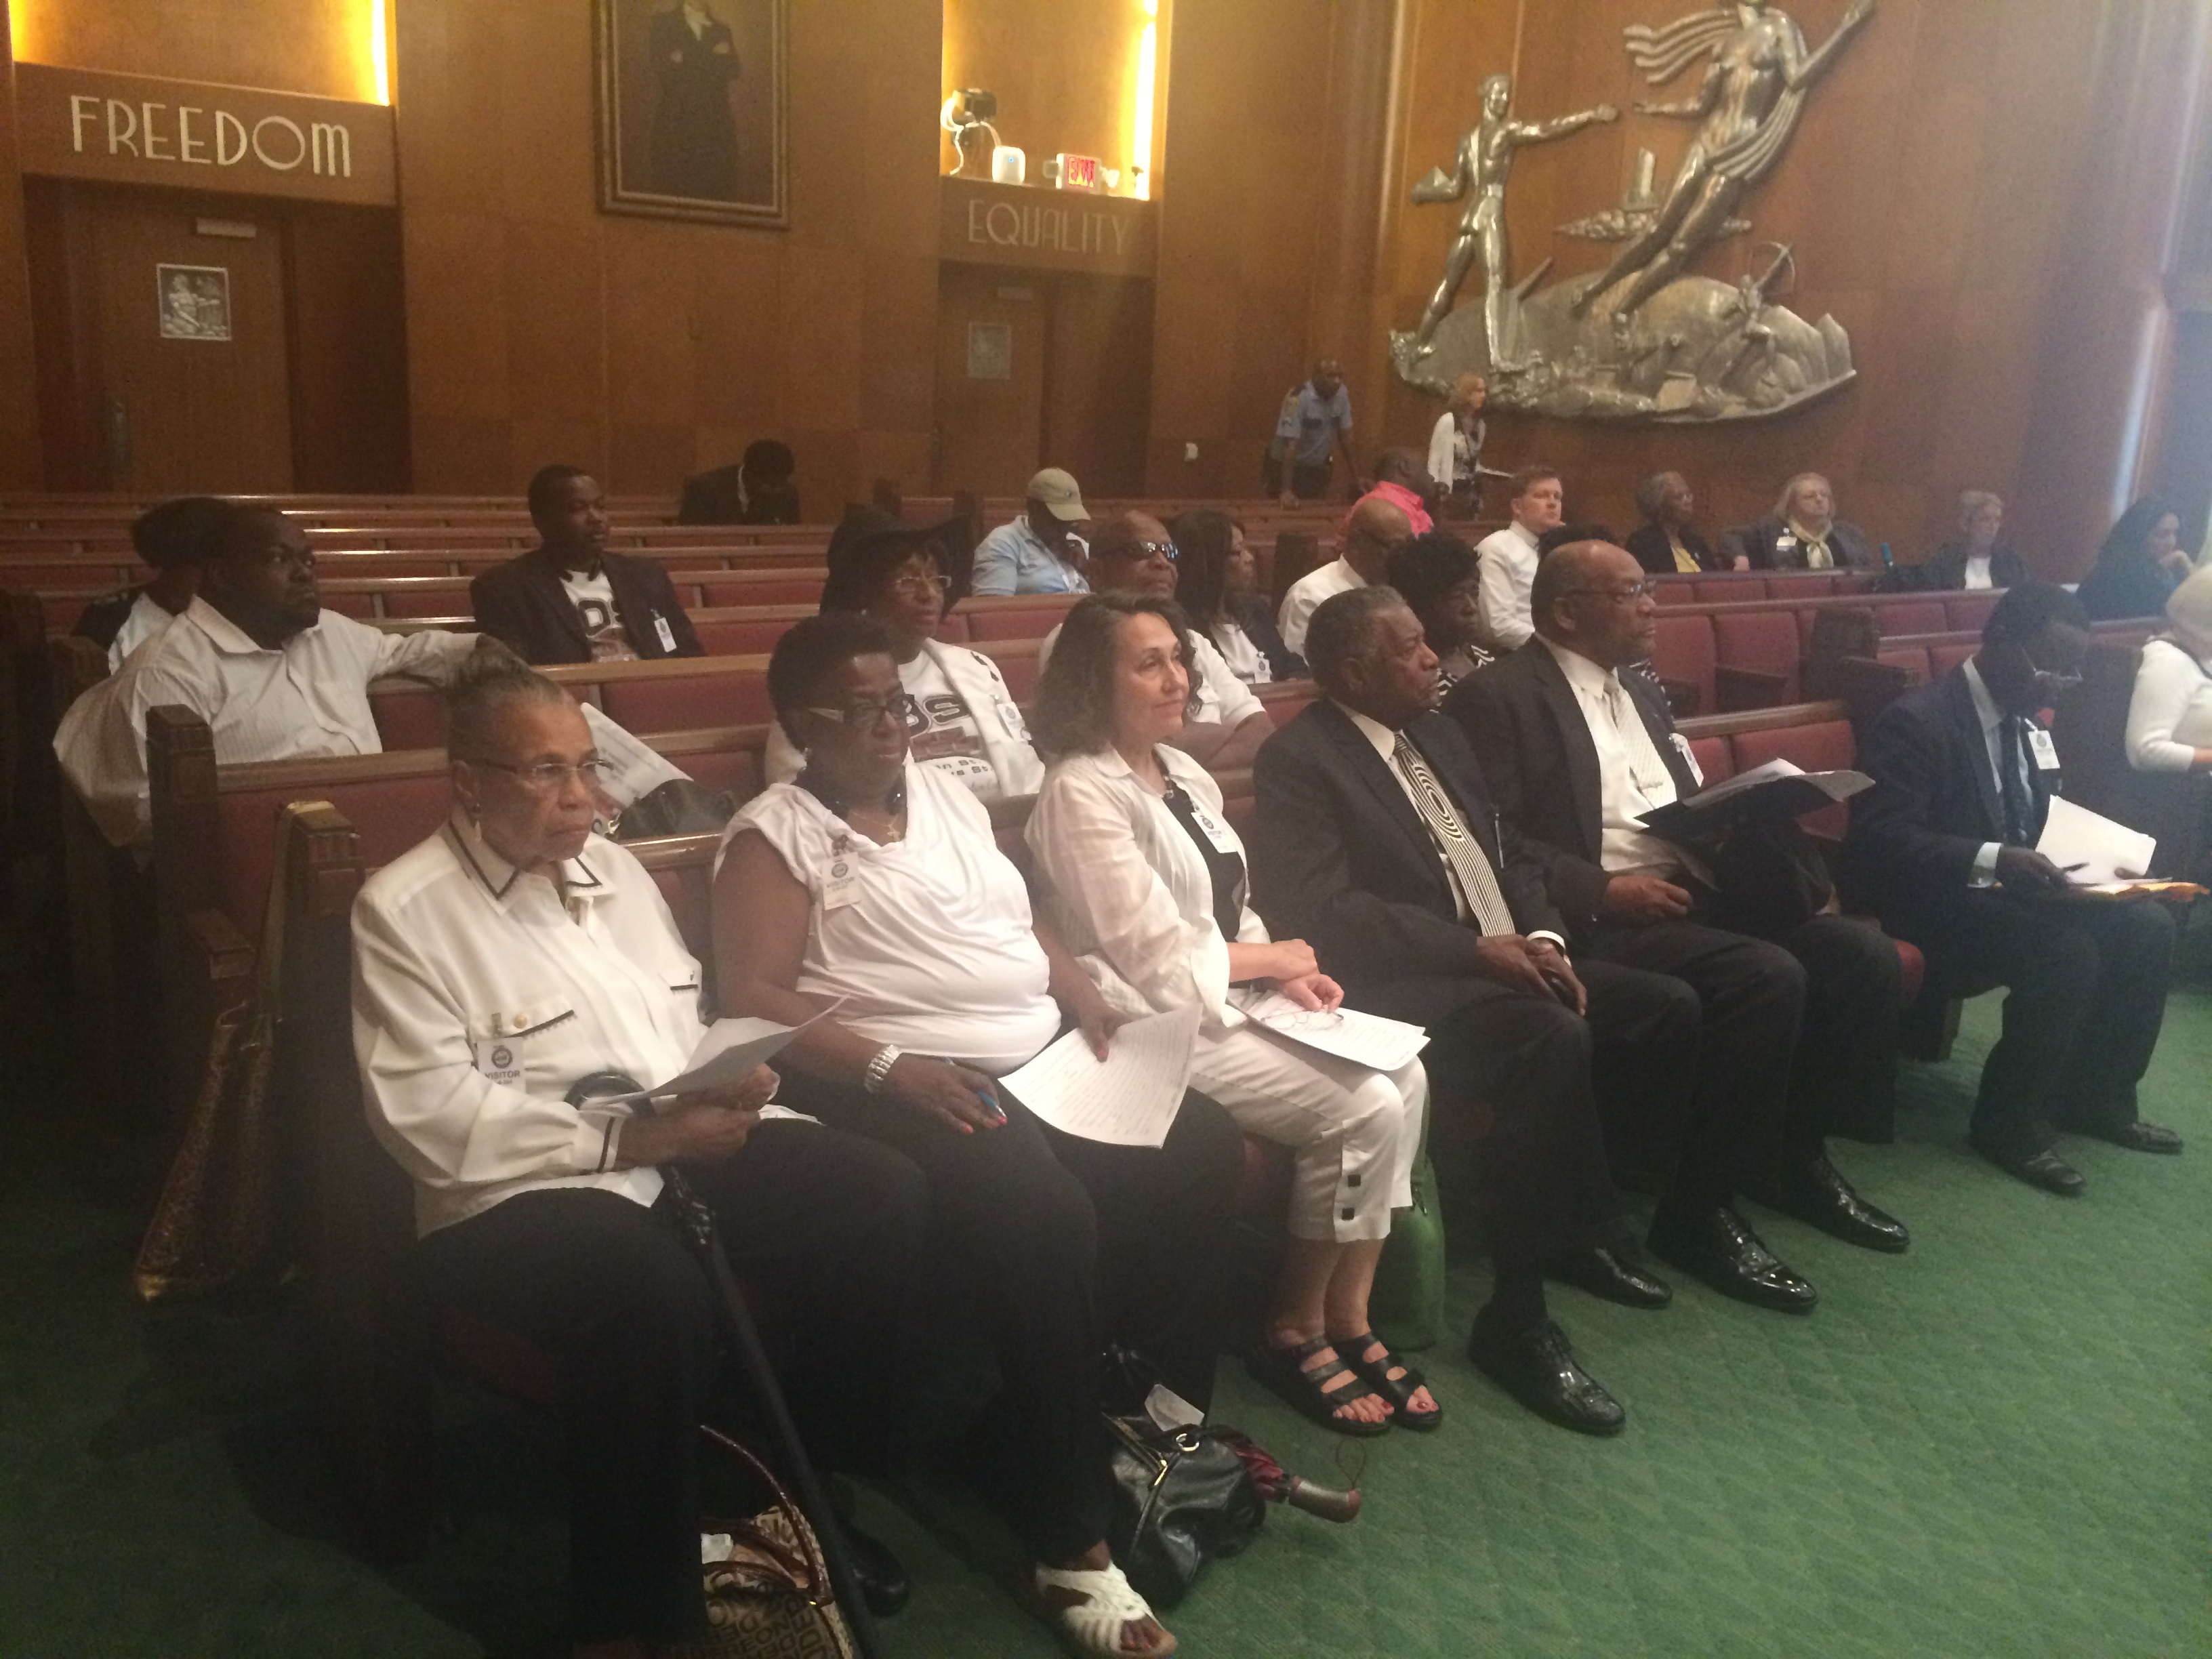 FTPC and community members waiting to speak at City Council during the public session.